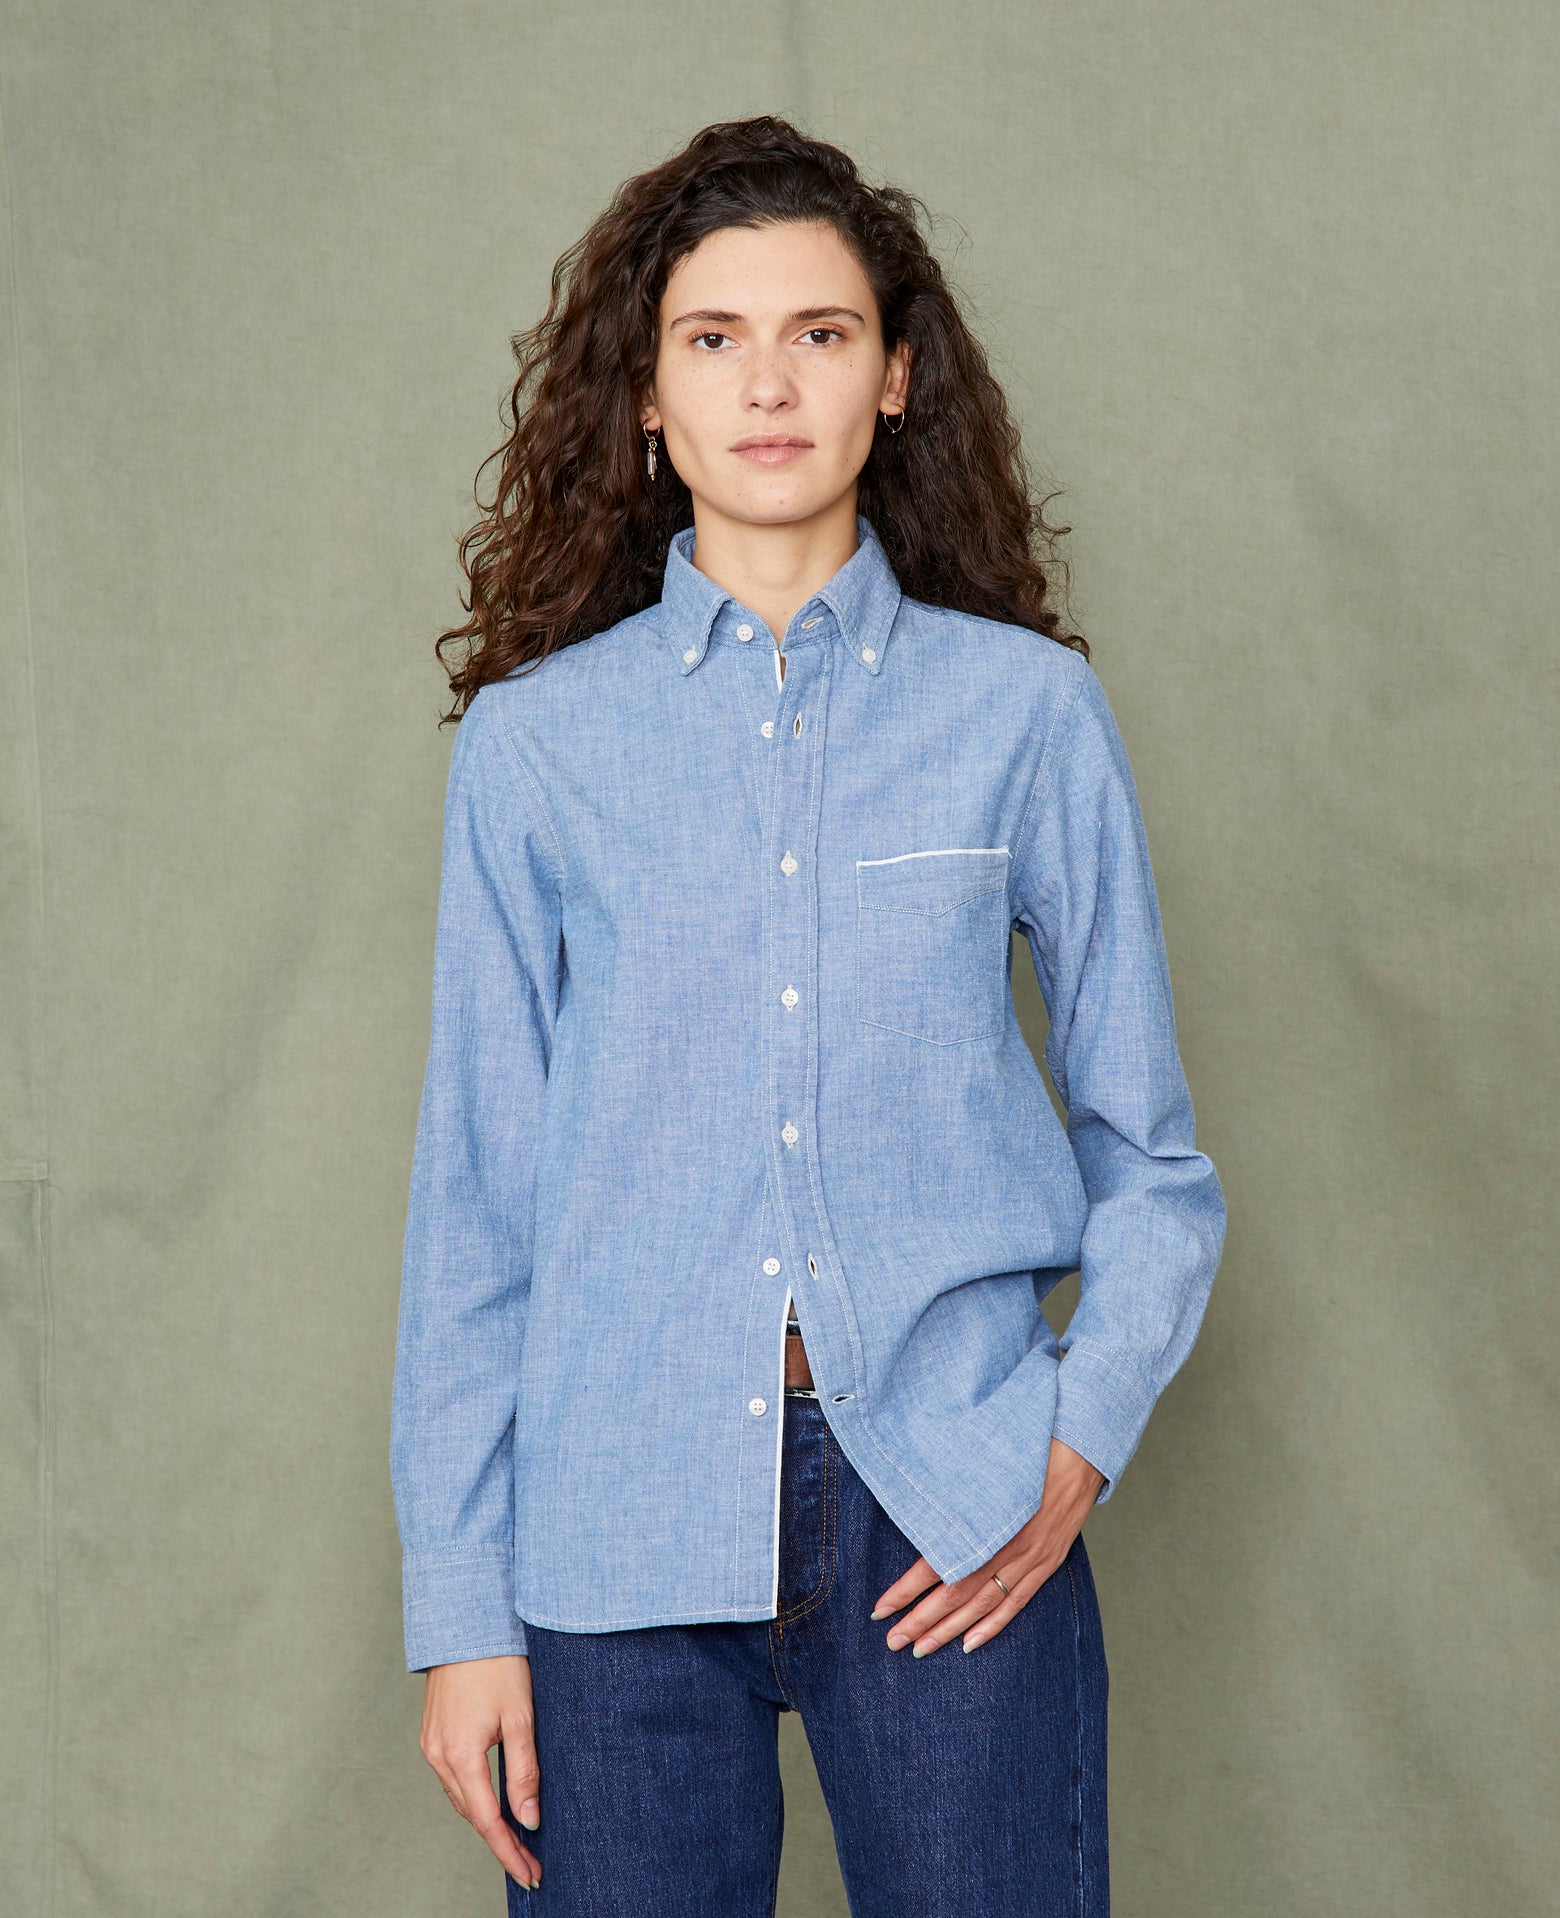 New button down shirt - Image 4